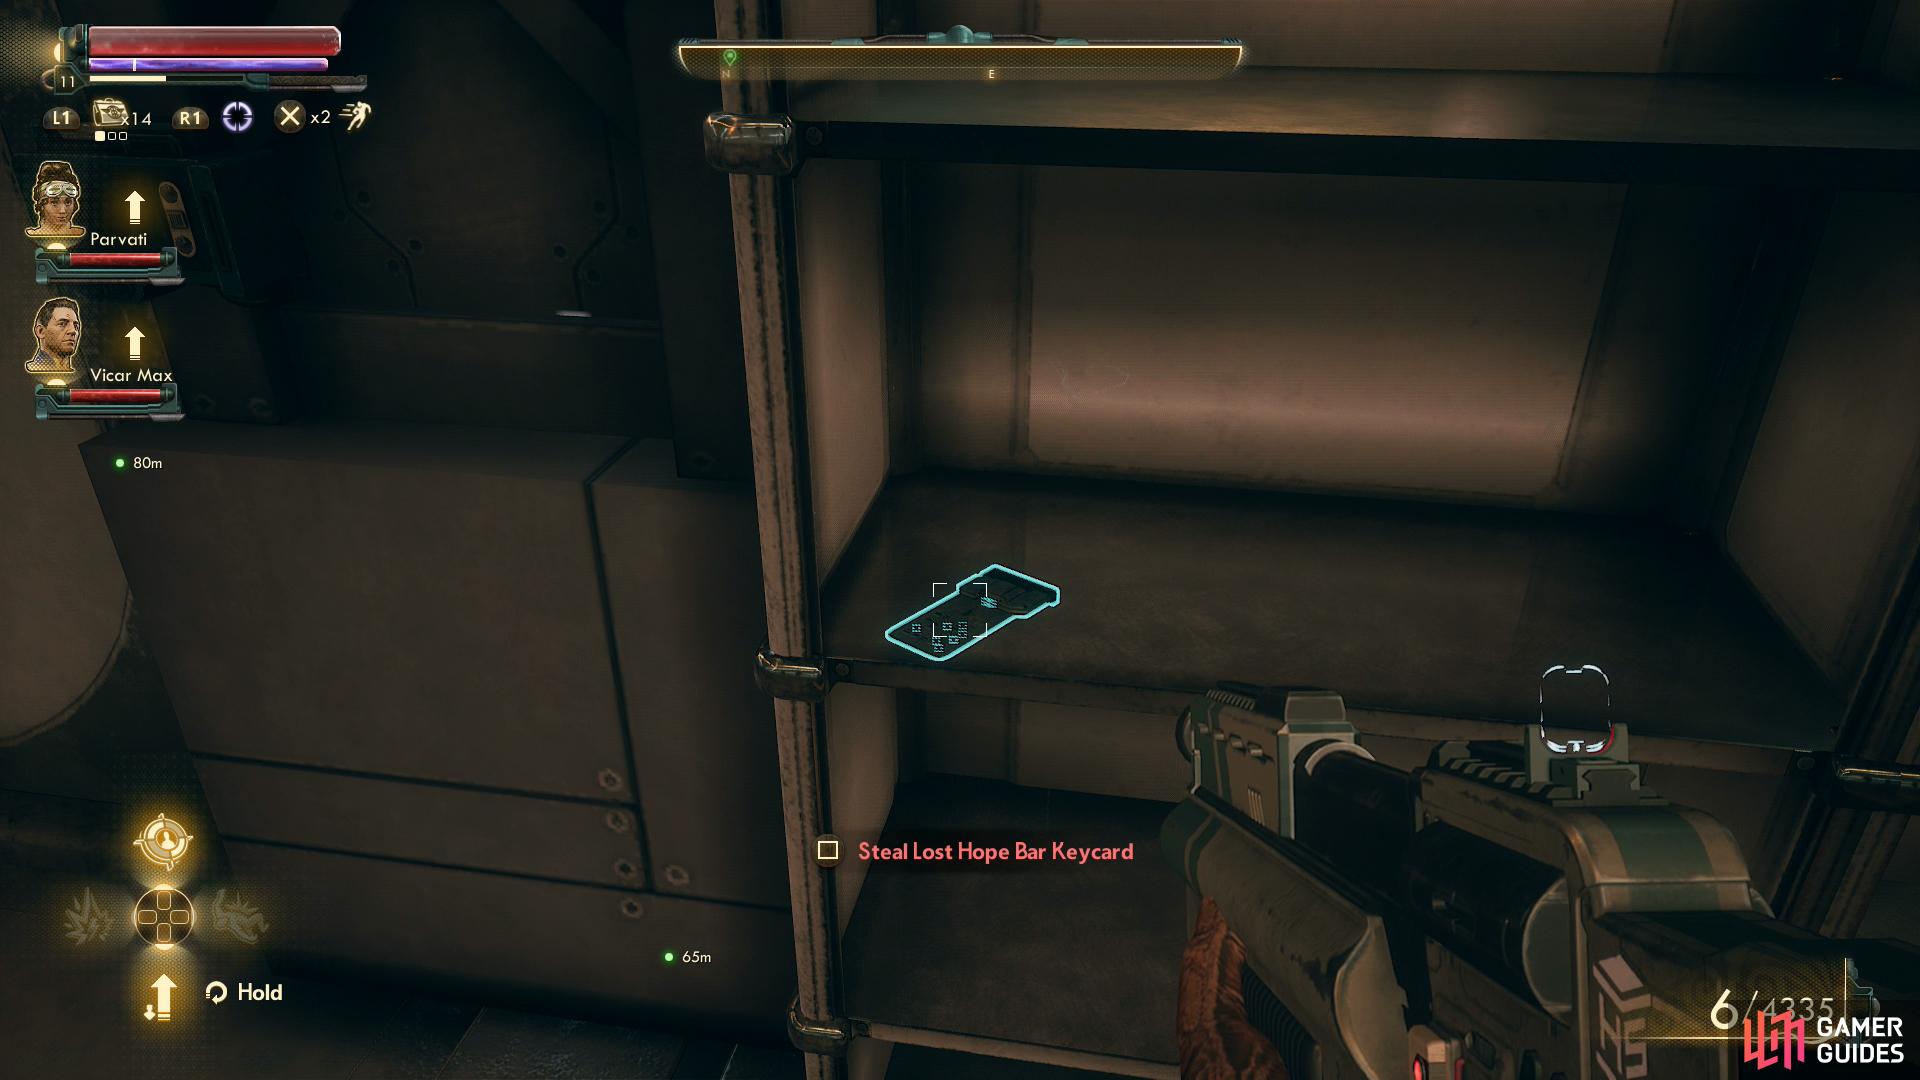 You can sneak into the storage room for The Lost Hope, where, ironically, you can find a keycard to get out through the door.